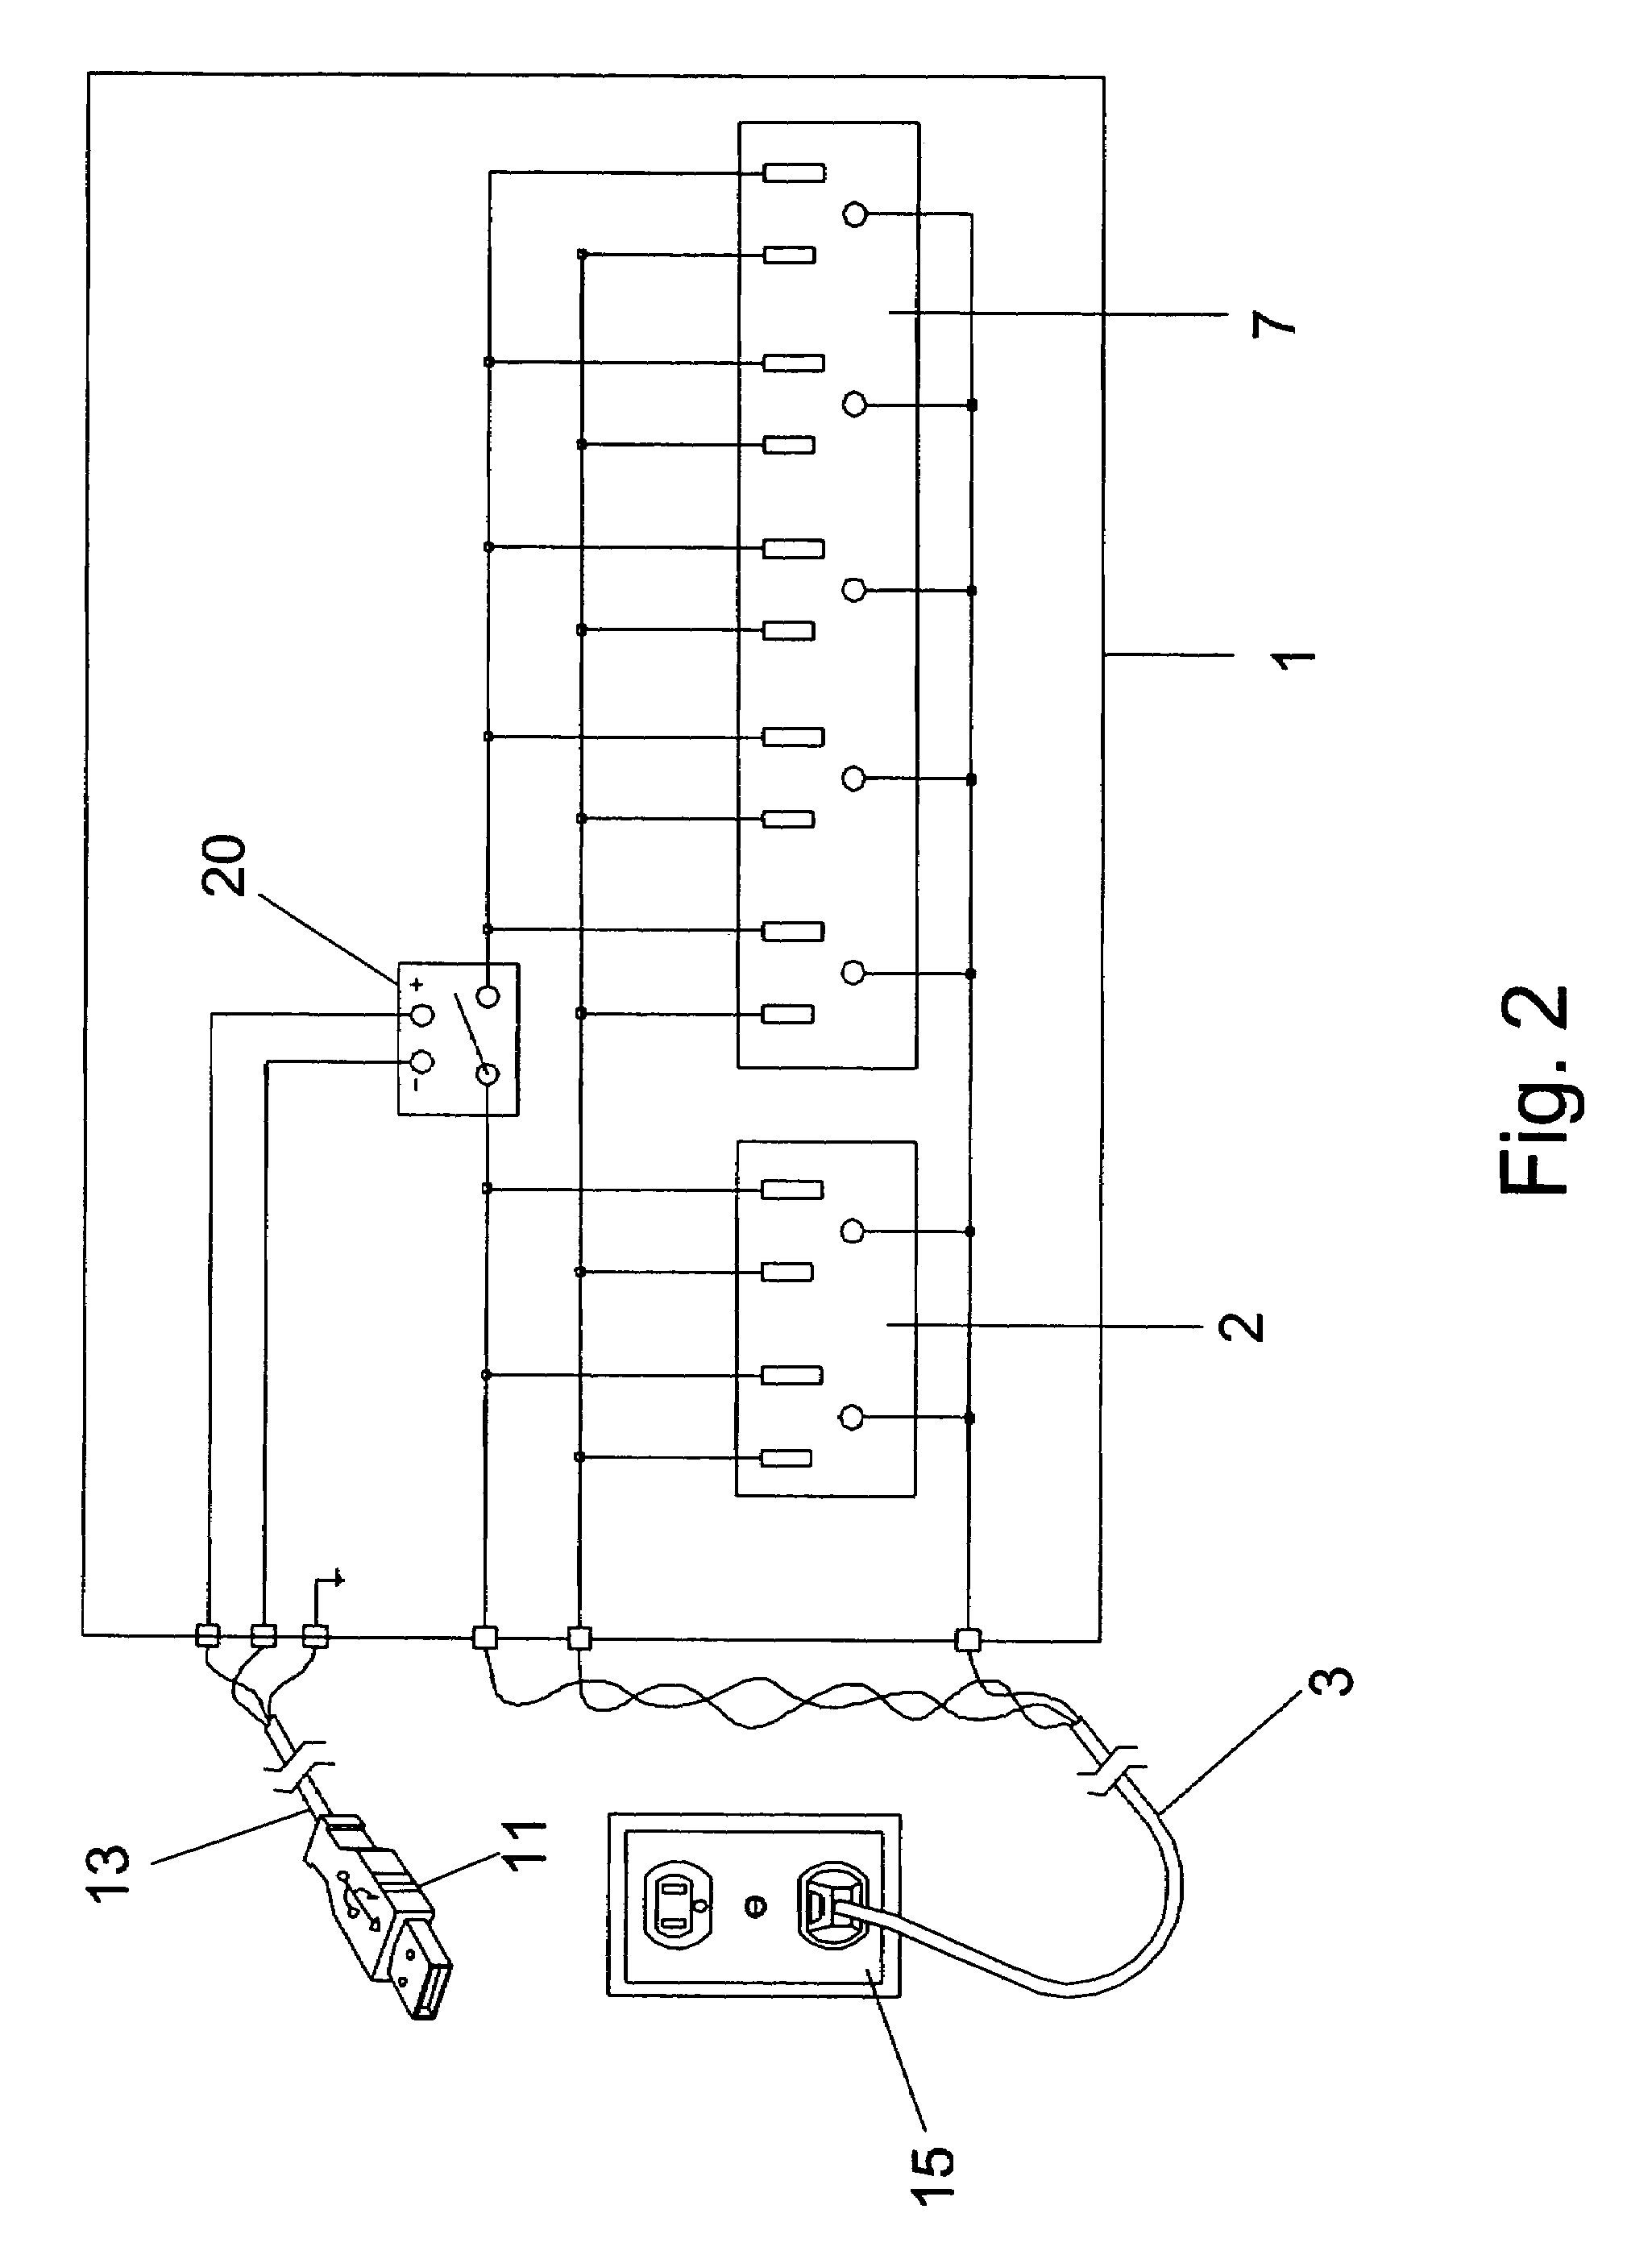 System and method for automatically interrupting power to a secondary device upon the extinguishing of power to a primary device